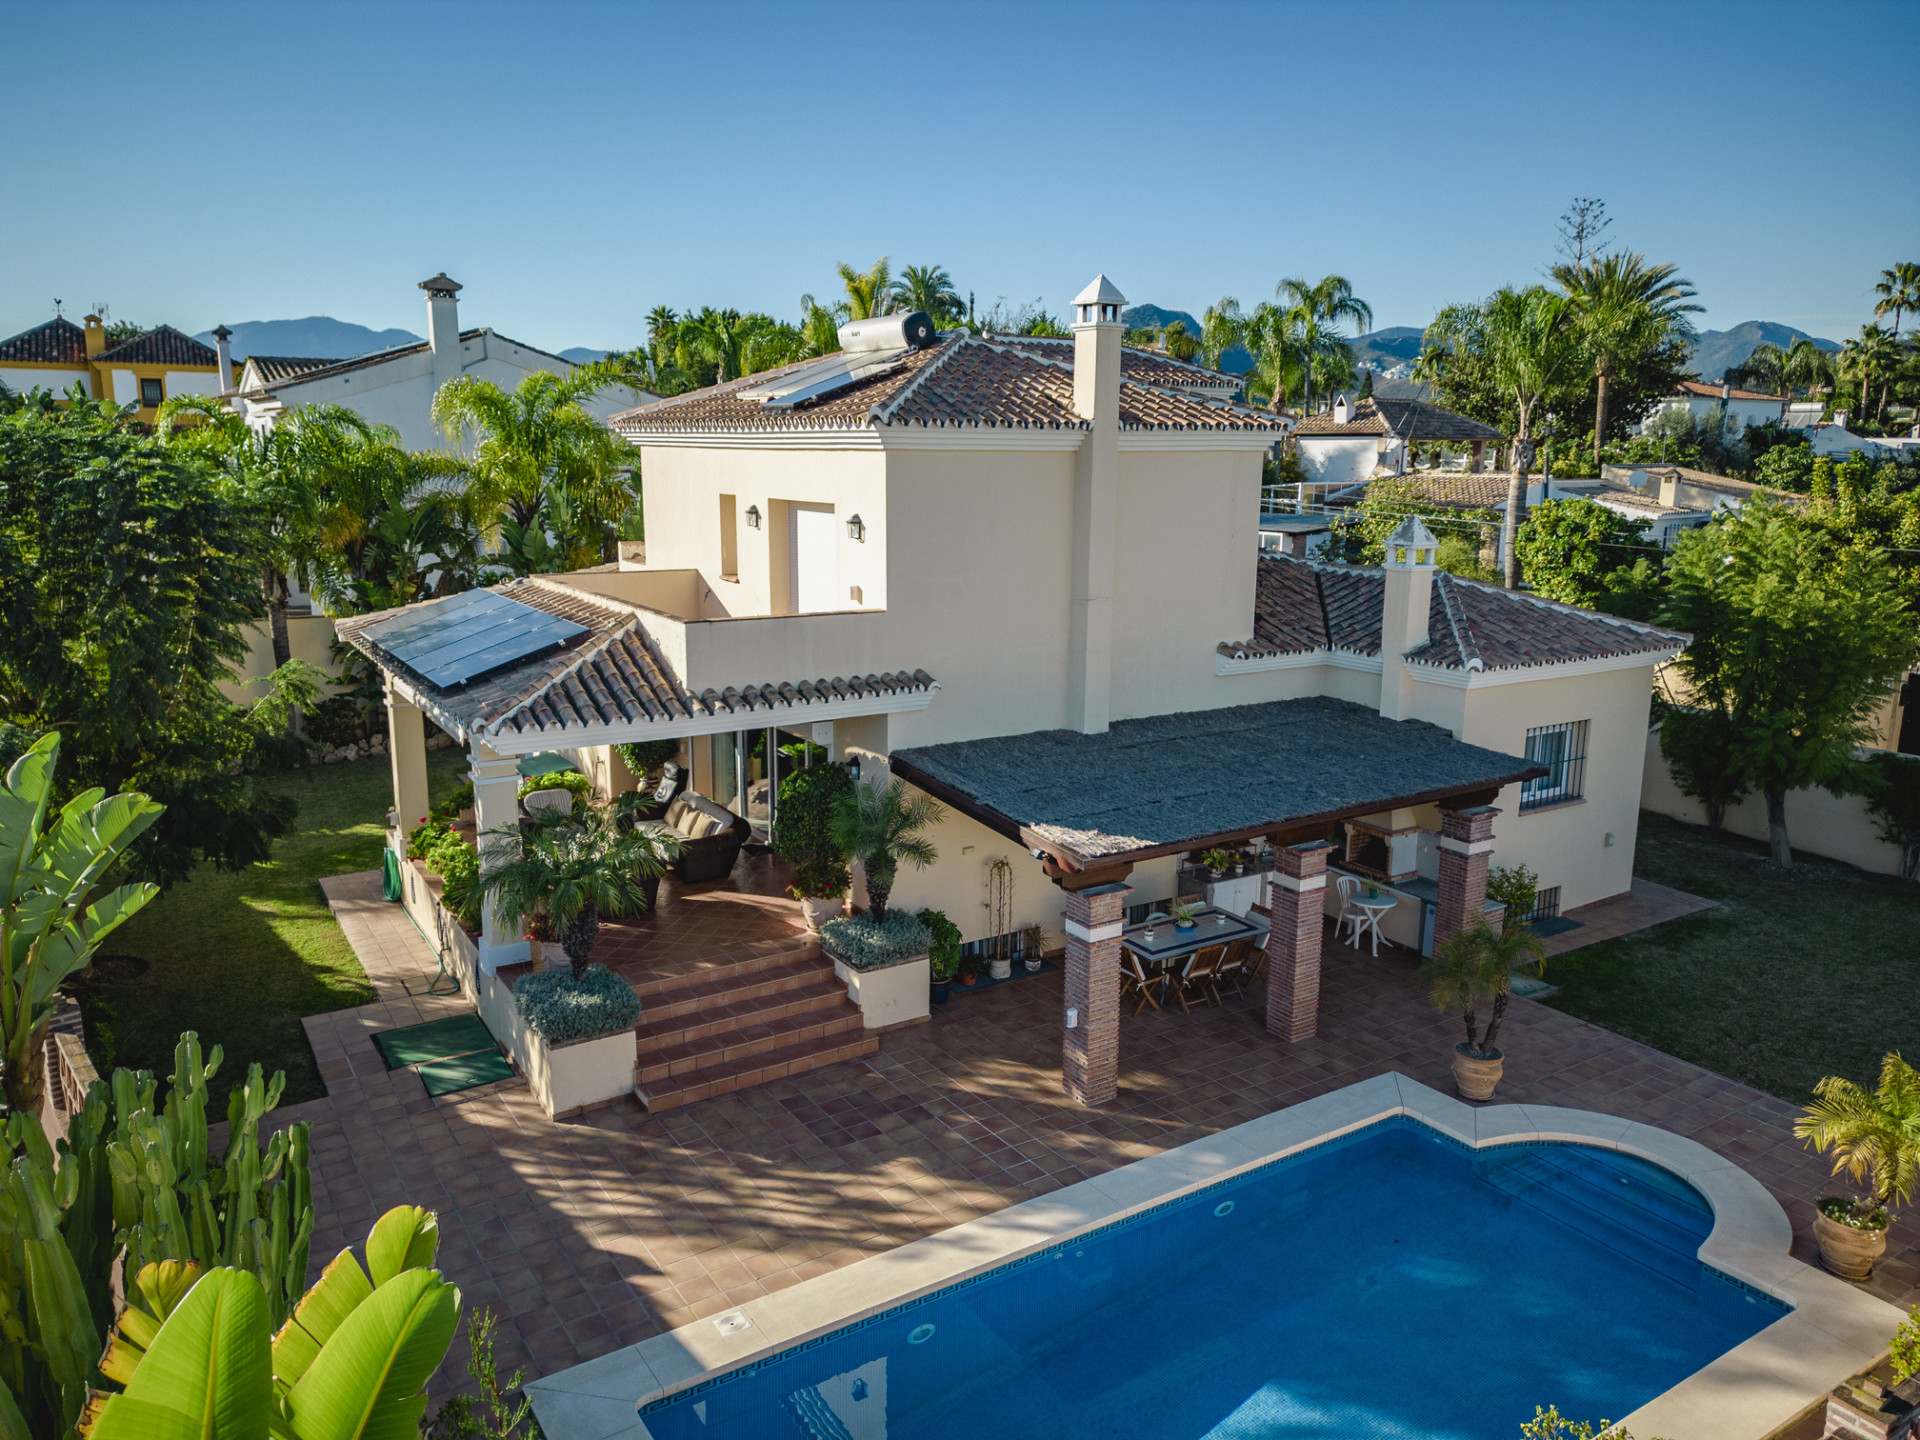 Fantastic family home located very close to the Guadalmina golf club